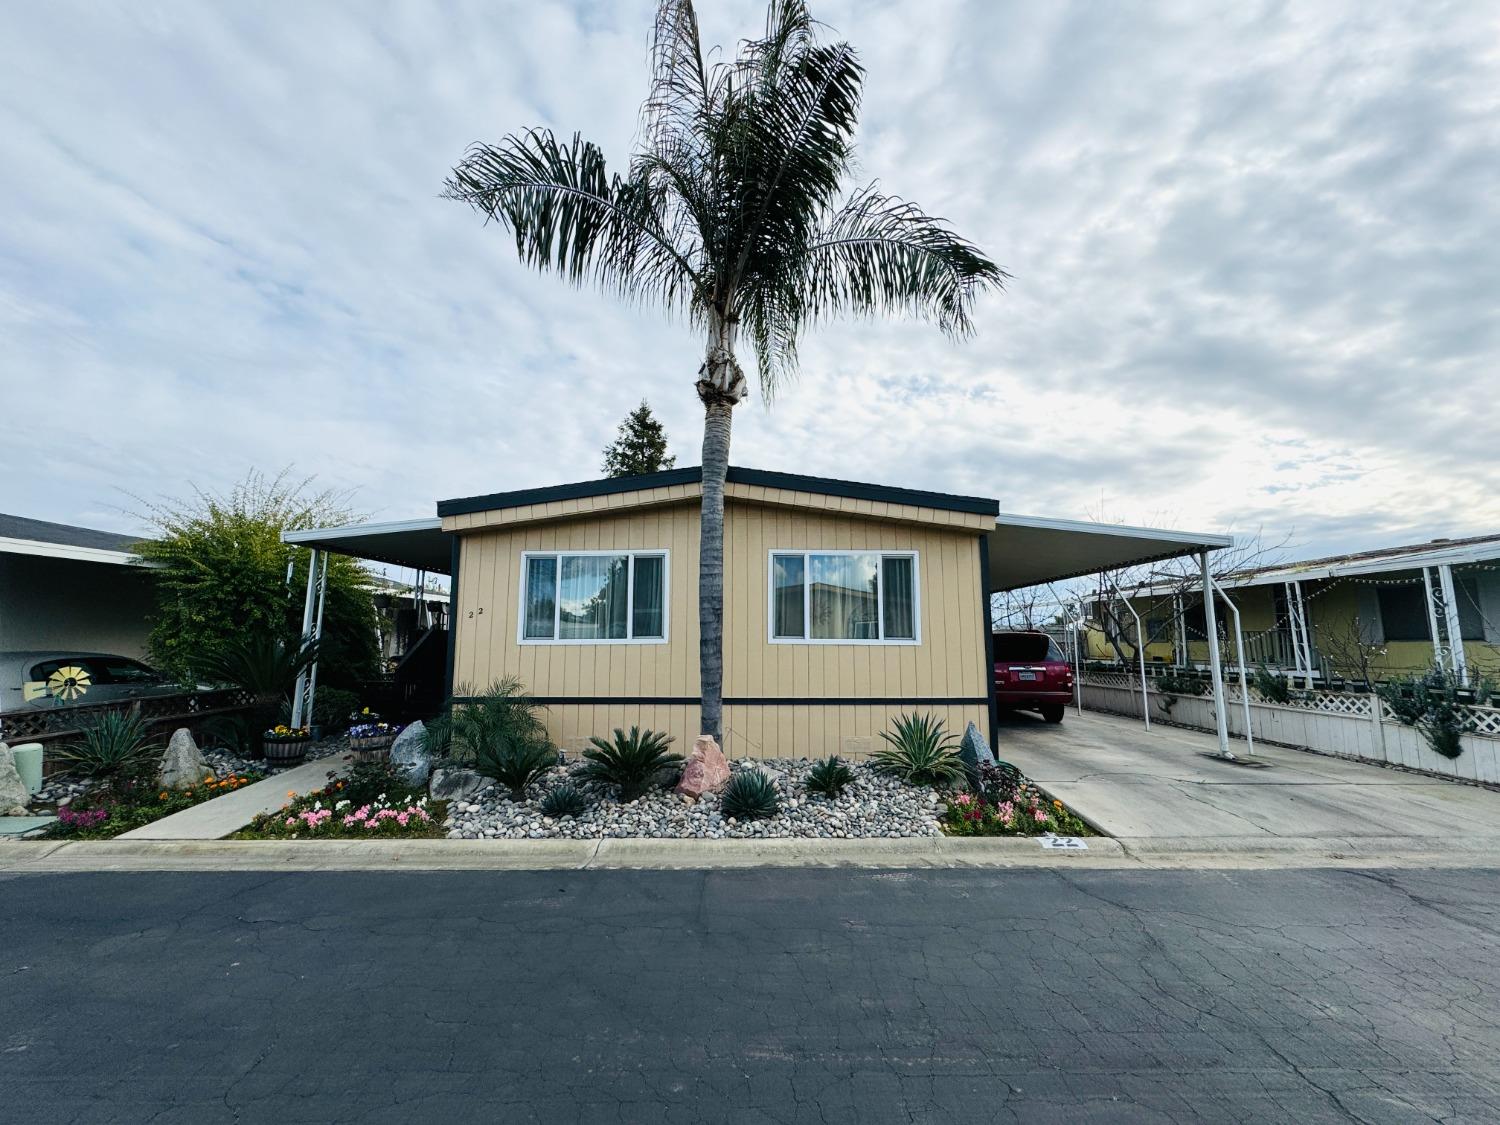 Photo of 2575 S Willow Ave #22 in Fresno, CA